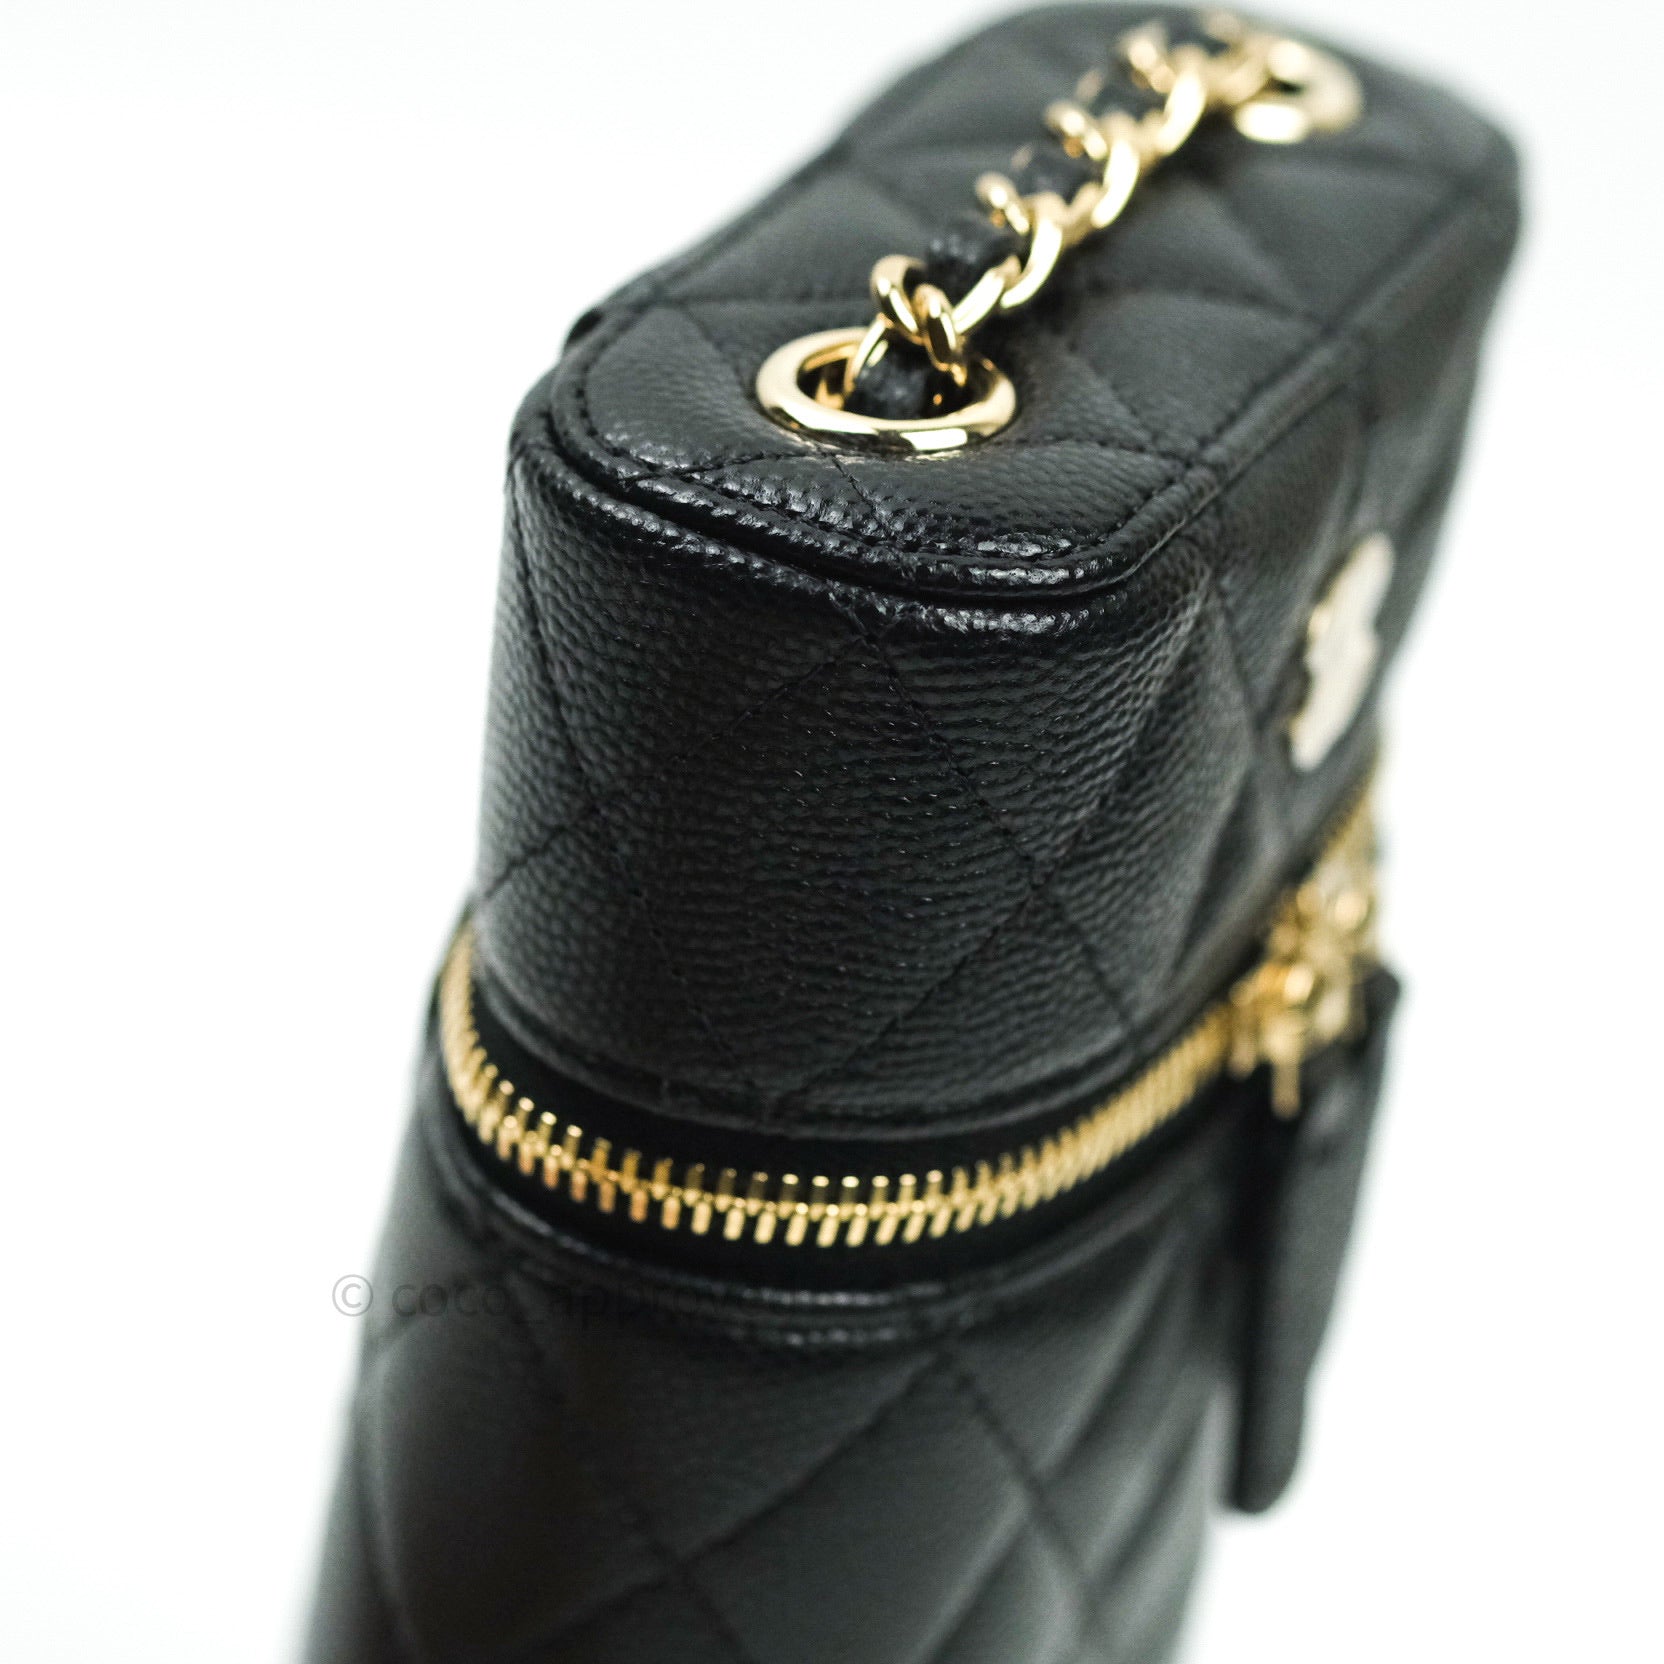 Chanel Vanity Phone Holder On Chain, Black Caviar with Gold